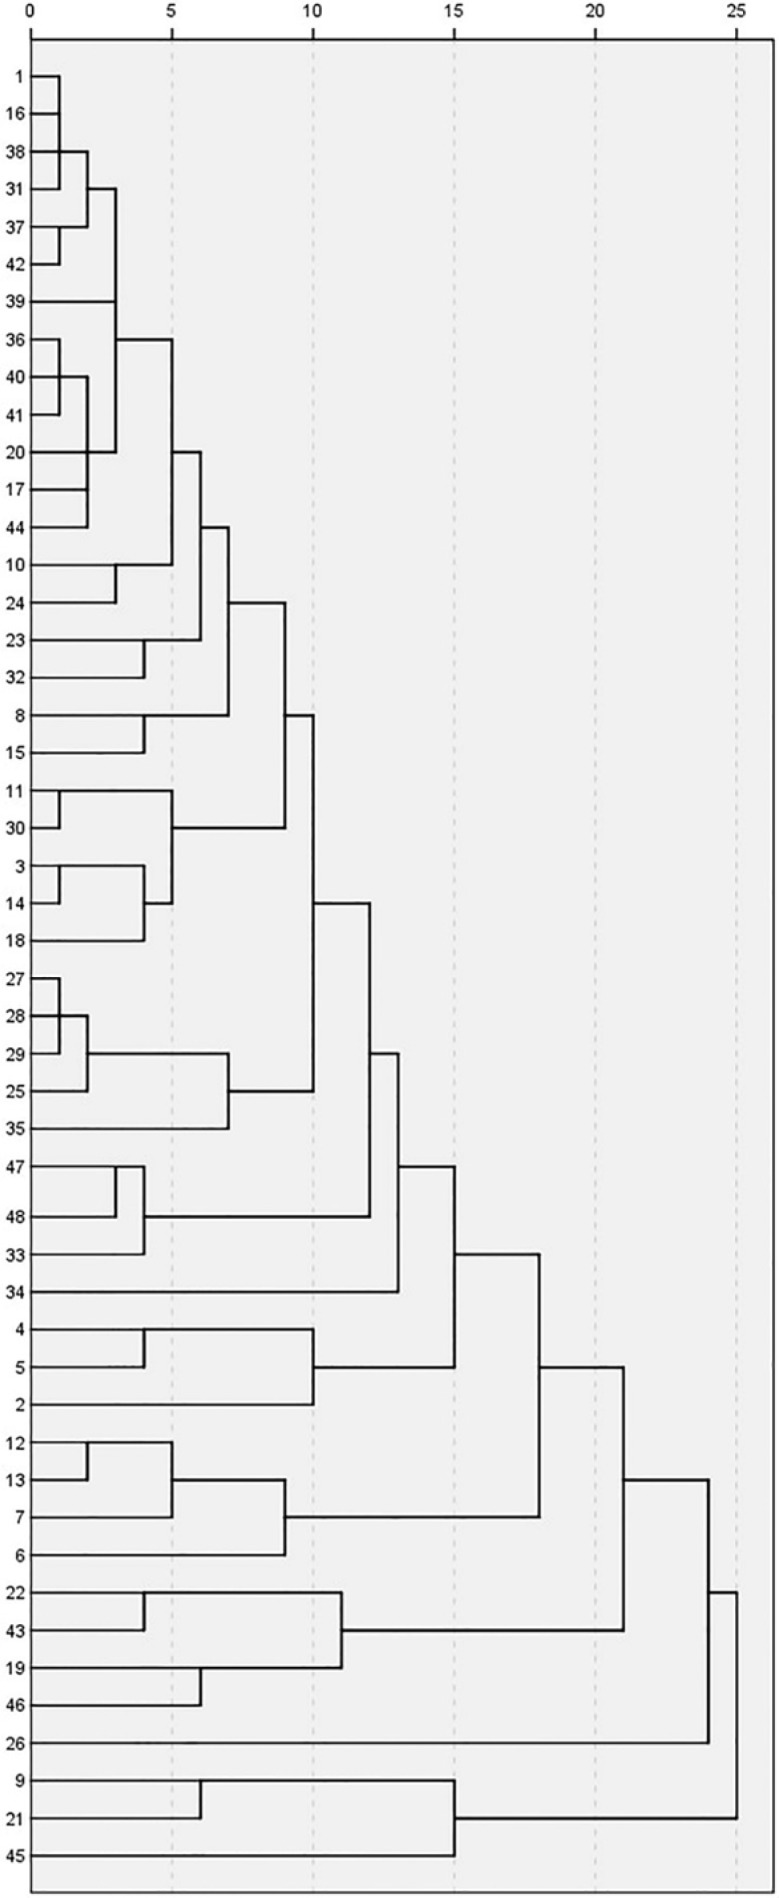 Dendrogram showing cluster analysis of different honey samples